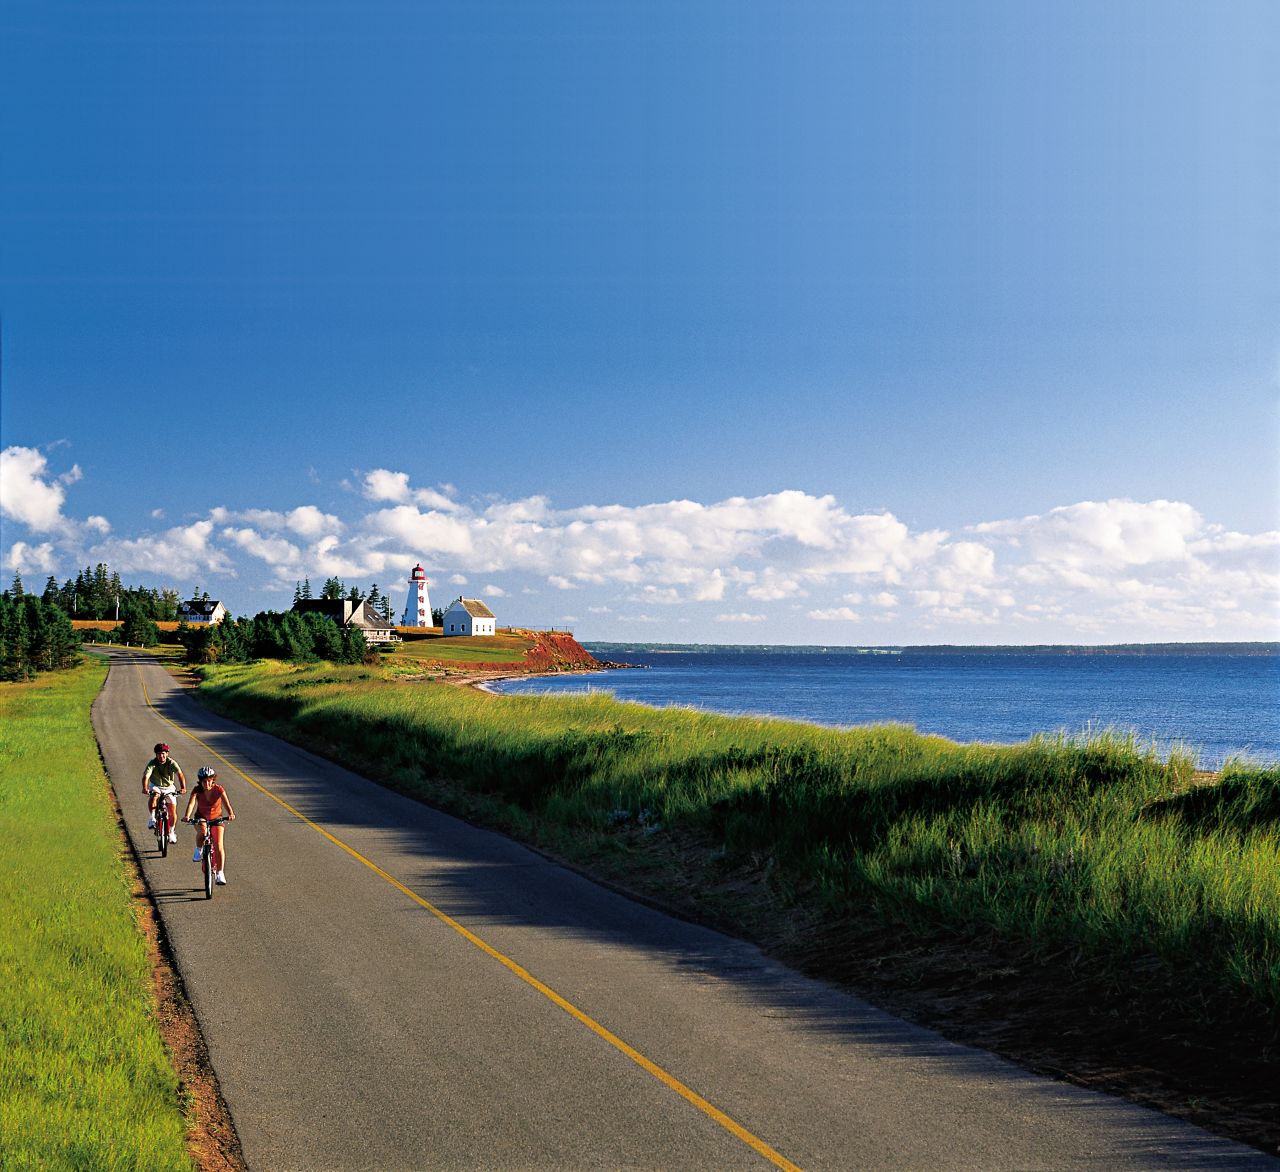 <strong>Prince Edward Island: </strong>Prince Edward Island, which is Canada's smallest province, gained global fame after Lucy Maud Montgomery's 1908 novel "Anne of Green Gables." More than 100 years later, PEI remains as glorious as ever with beautiful beaches, fresh seafood and historic architecture.